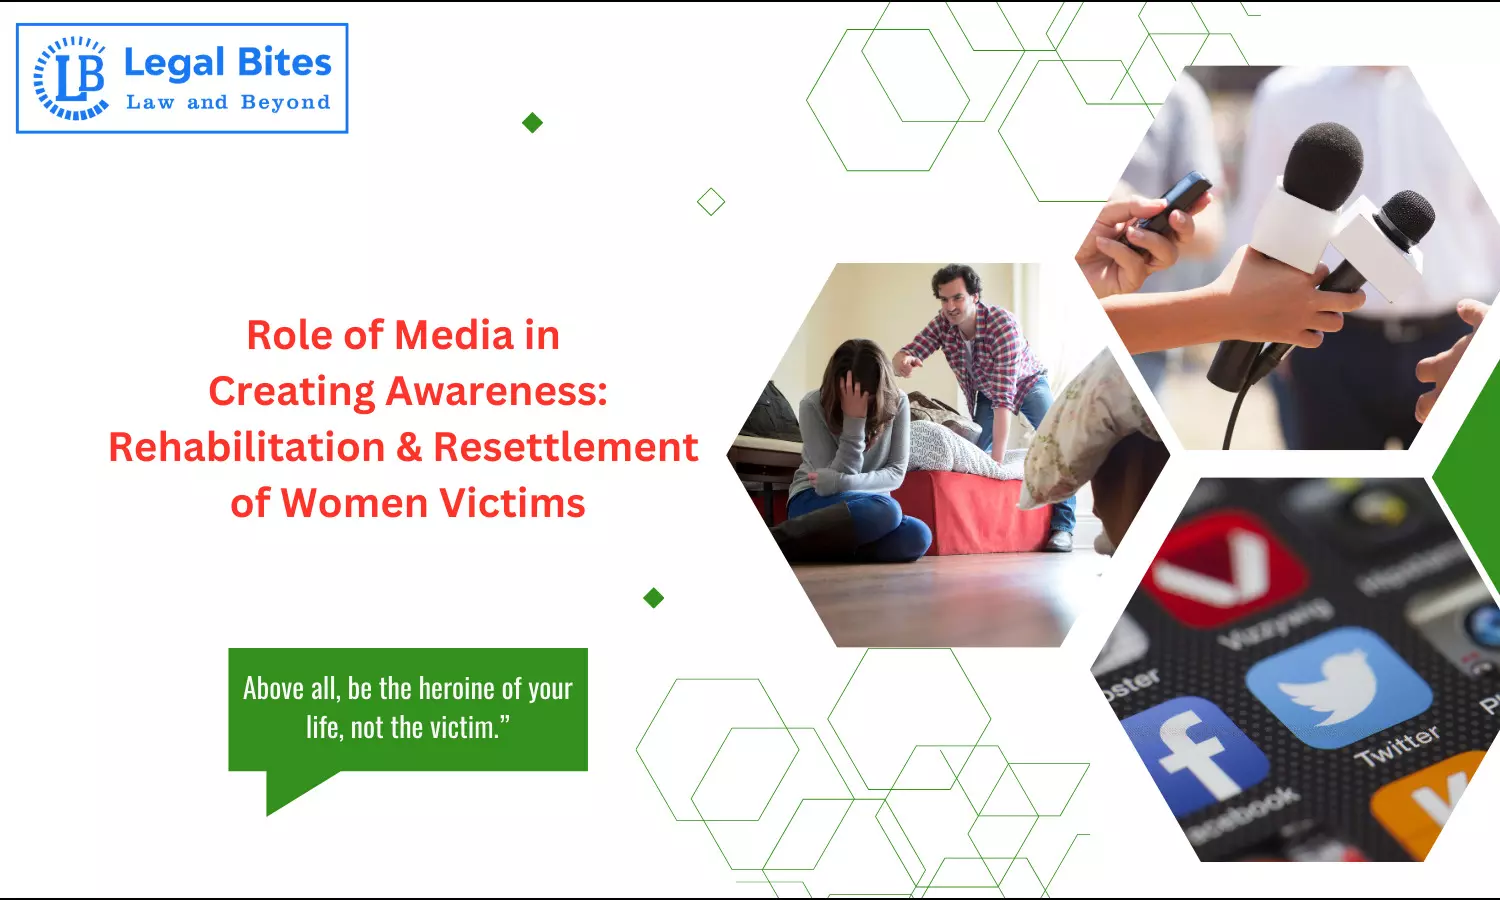 Role of Media in Creating Awareness about the Need for Rehabilitation and Resettlement of Women Victims of Violence